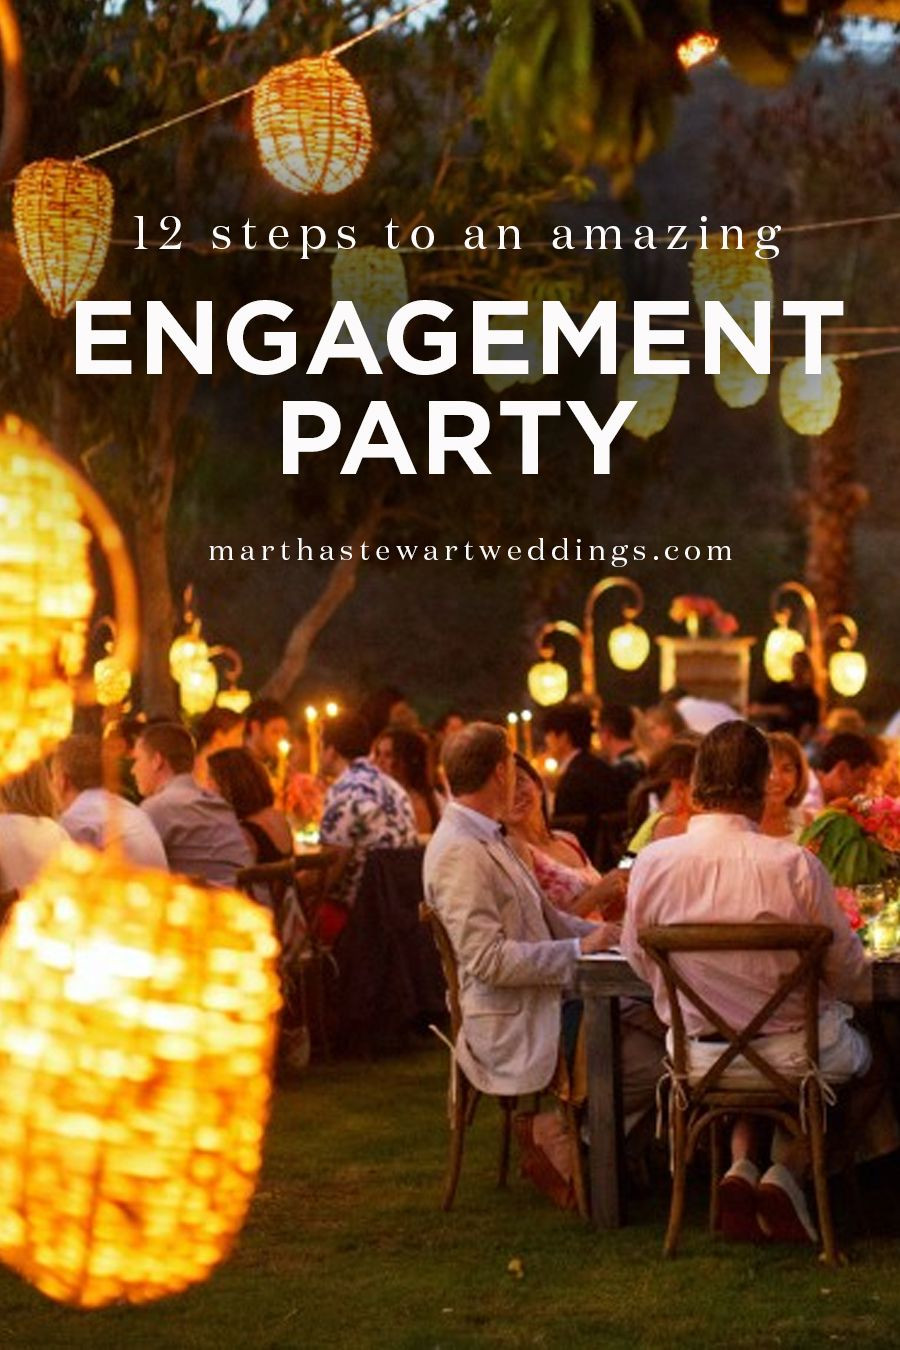 Engagement Party Ideas Martha Stewart
 12 Steps to an Amazing Engagement Party